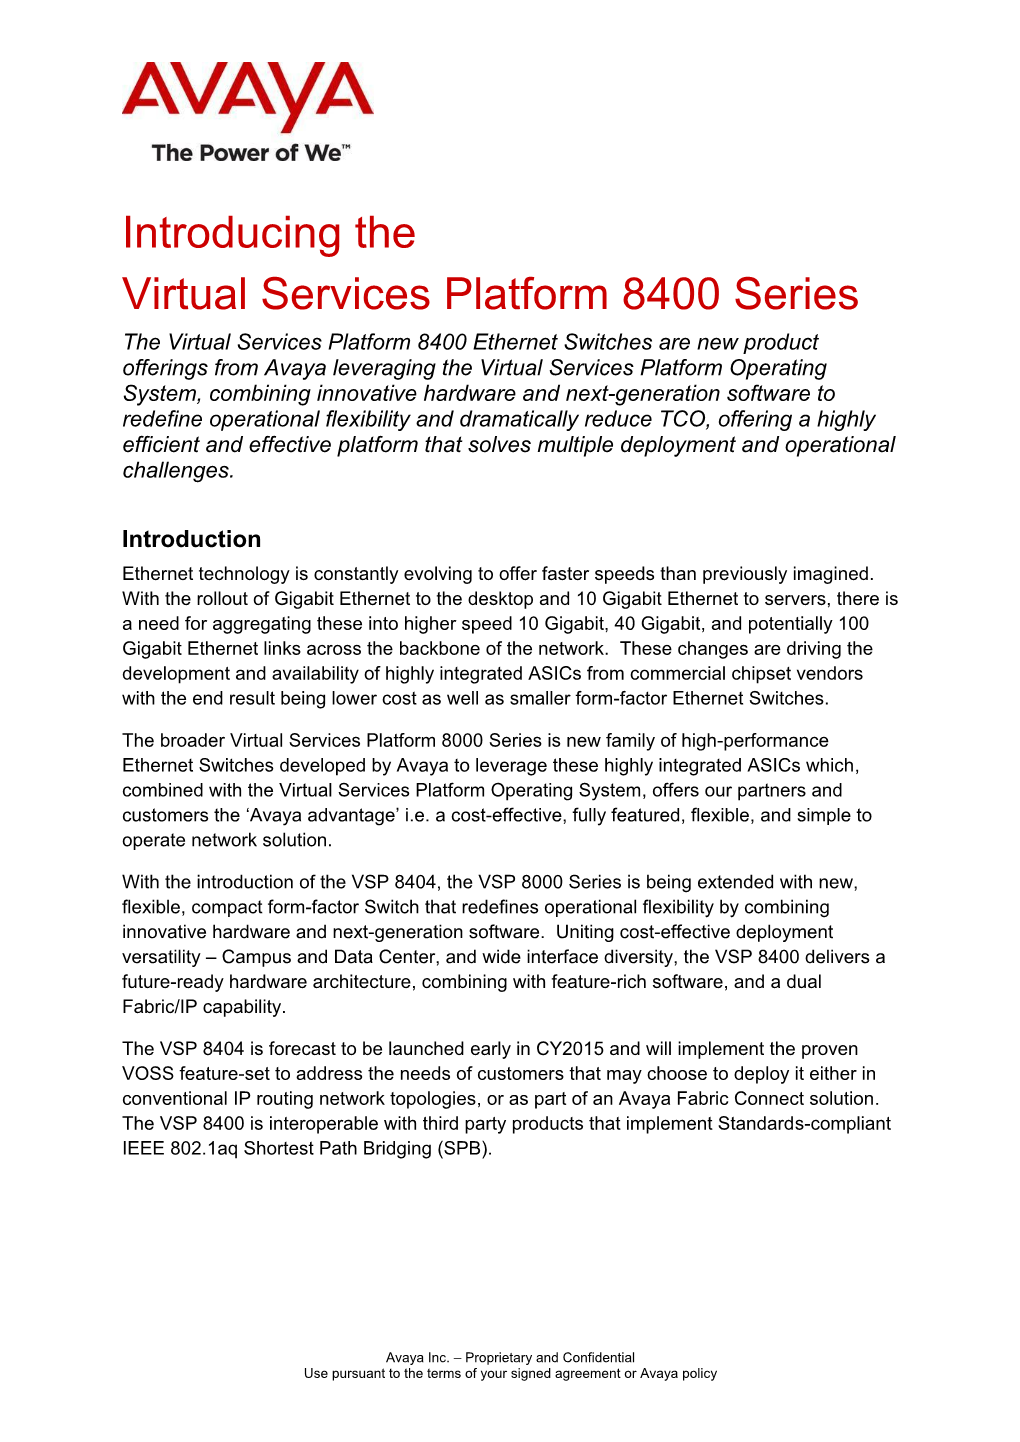 Introducing the VSP 8400 Series